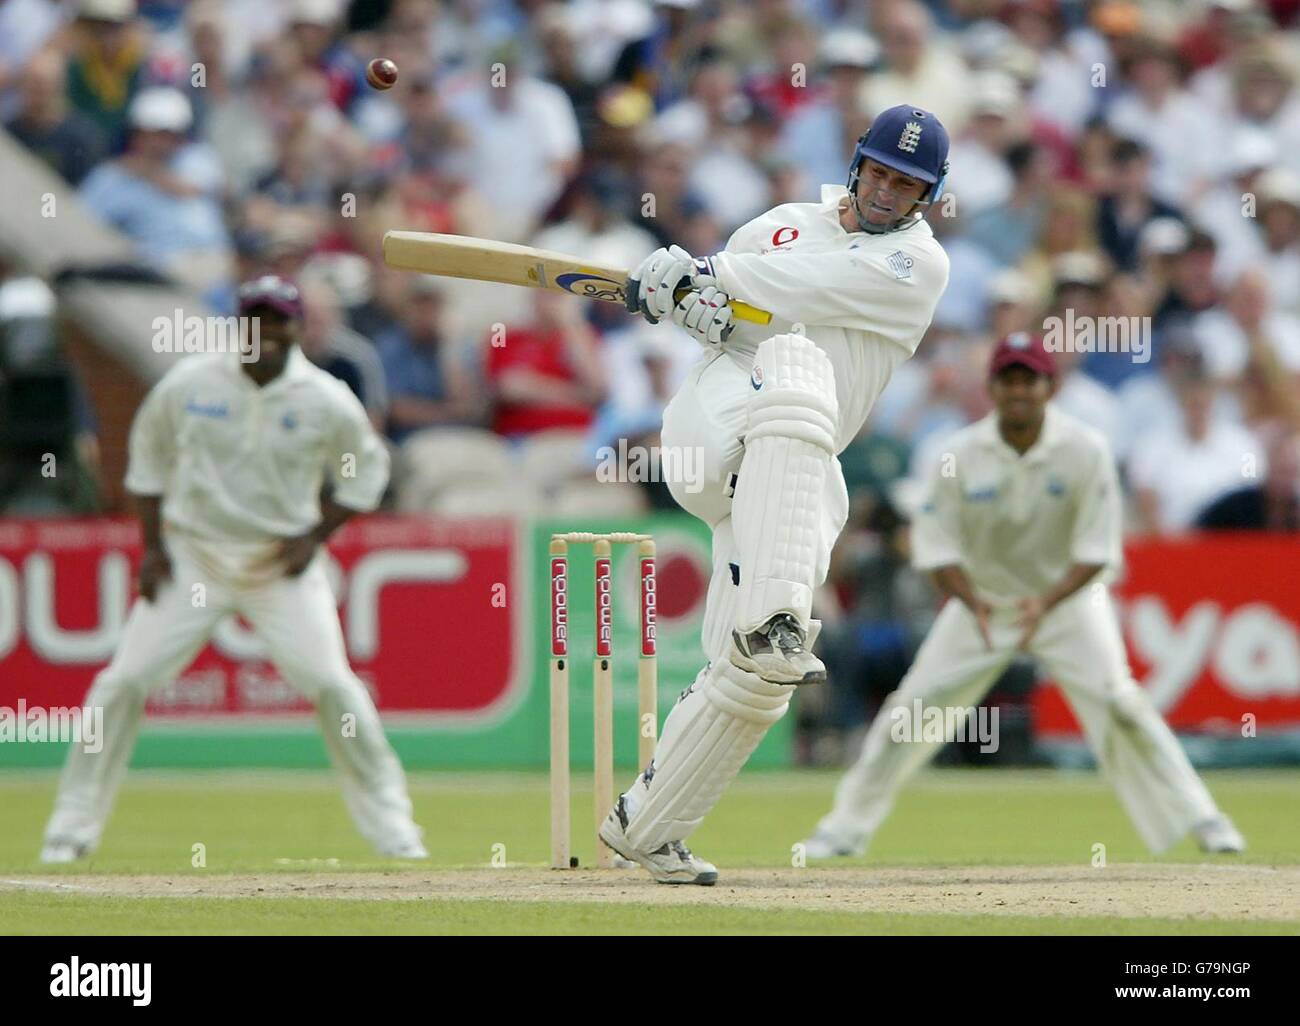 England's Graham Thorpe plays a shot off the bowling of West Indies' Corey Collymore during the fourth day of the third npower Test match at Old Trafford. Stock Photo